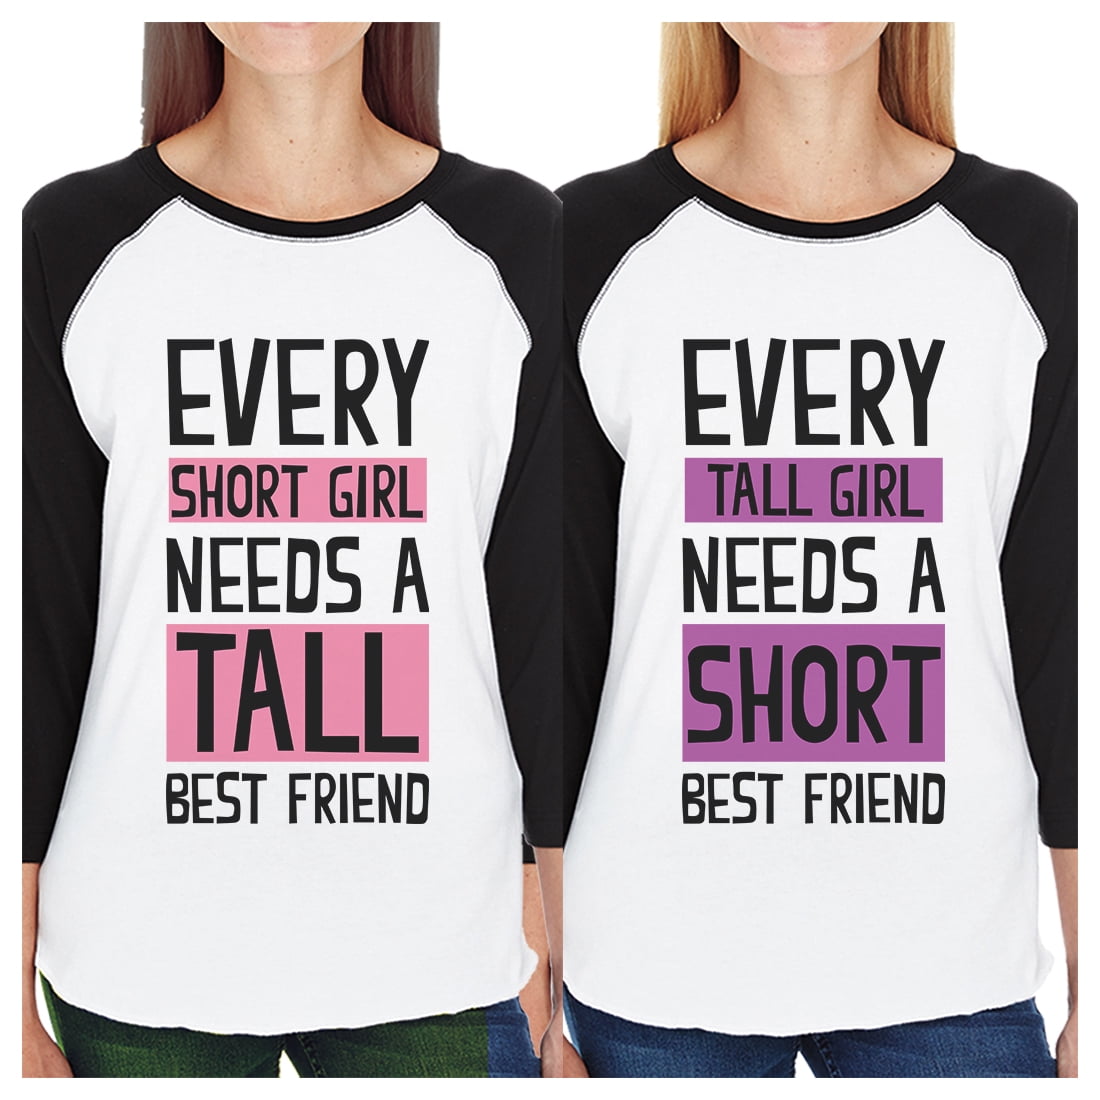 You know girl перевод. Friend short. Friends best outfits. Best friends ever. Girl Gift for best friend.